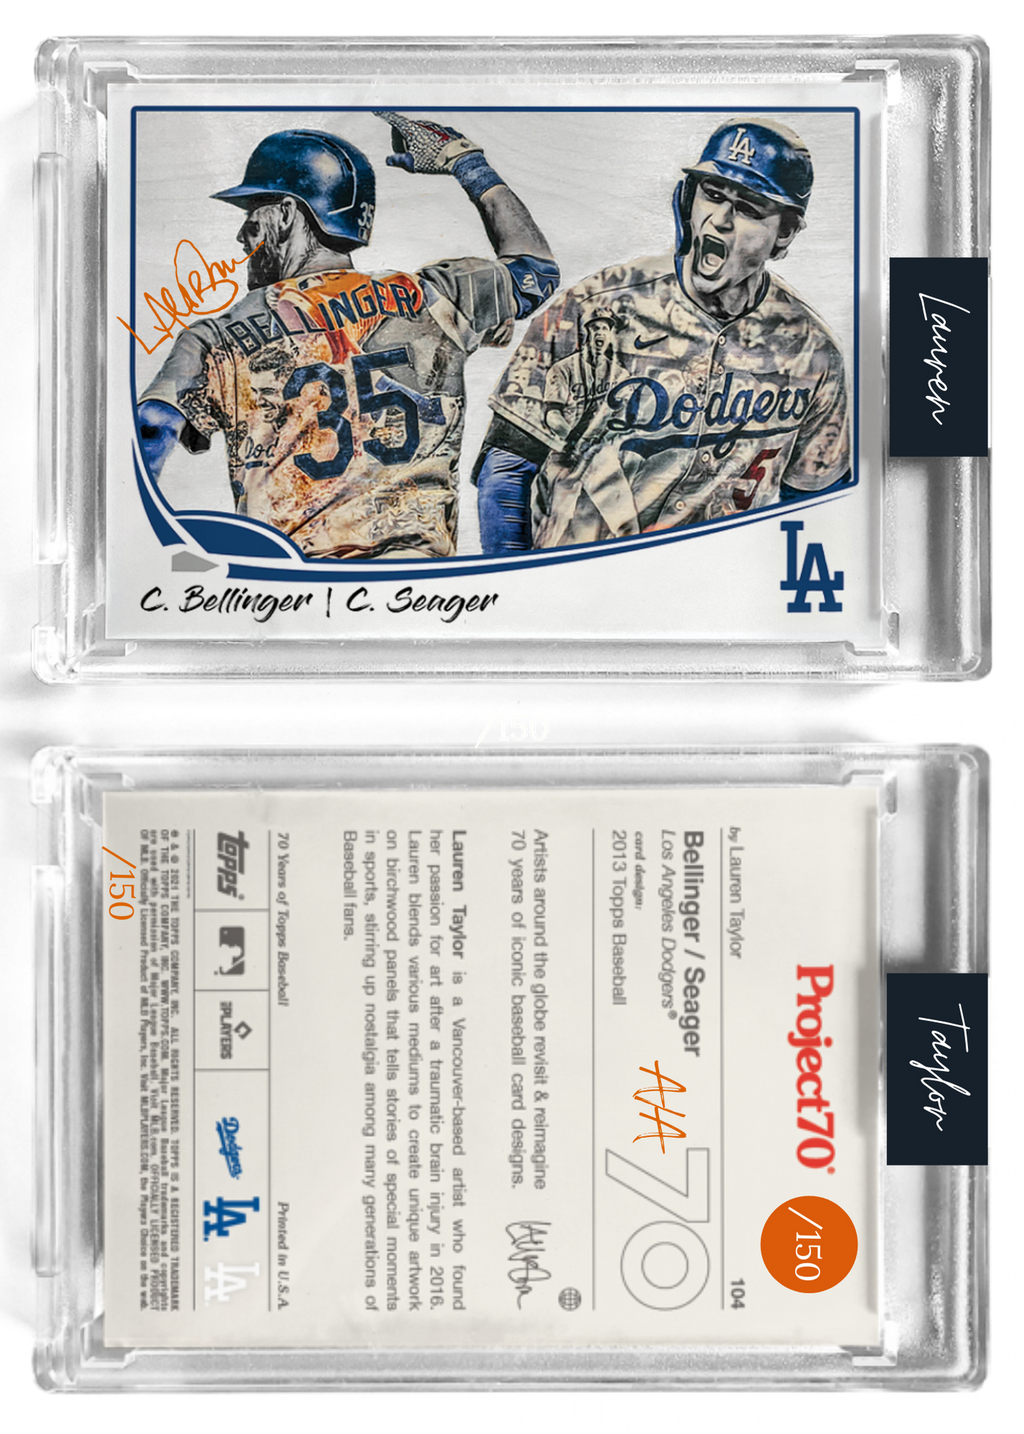 /150 Orange Artist Signature - Topps Project 70 130pt card #104 by Lauren Taylor - Cody Bellinger / Corey Seager